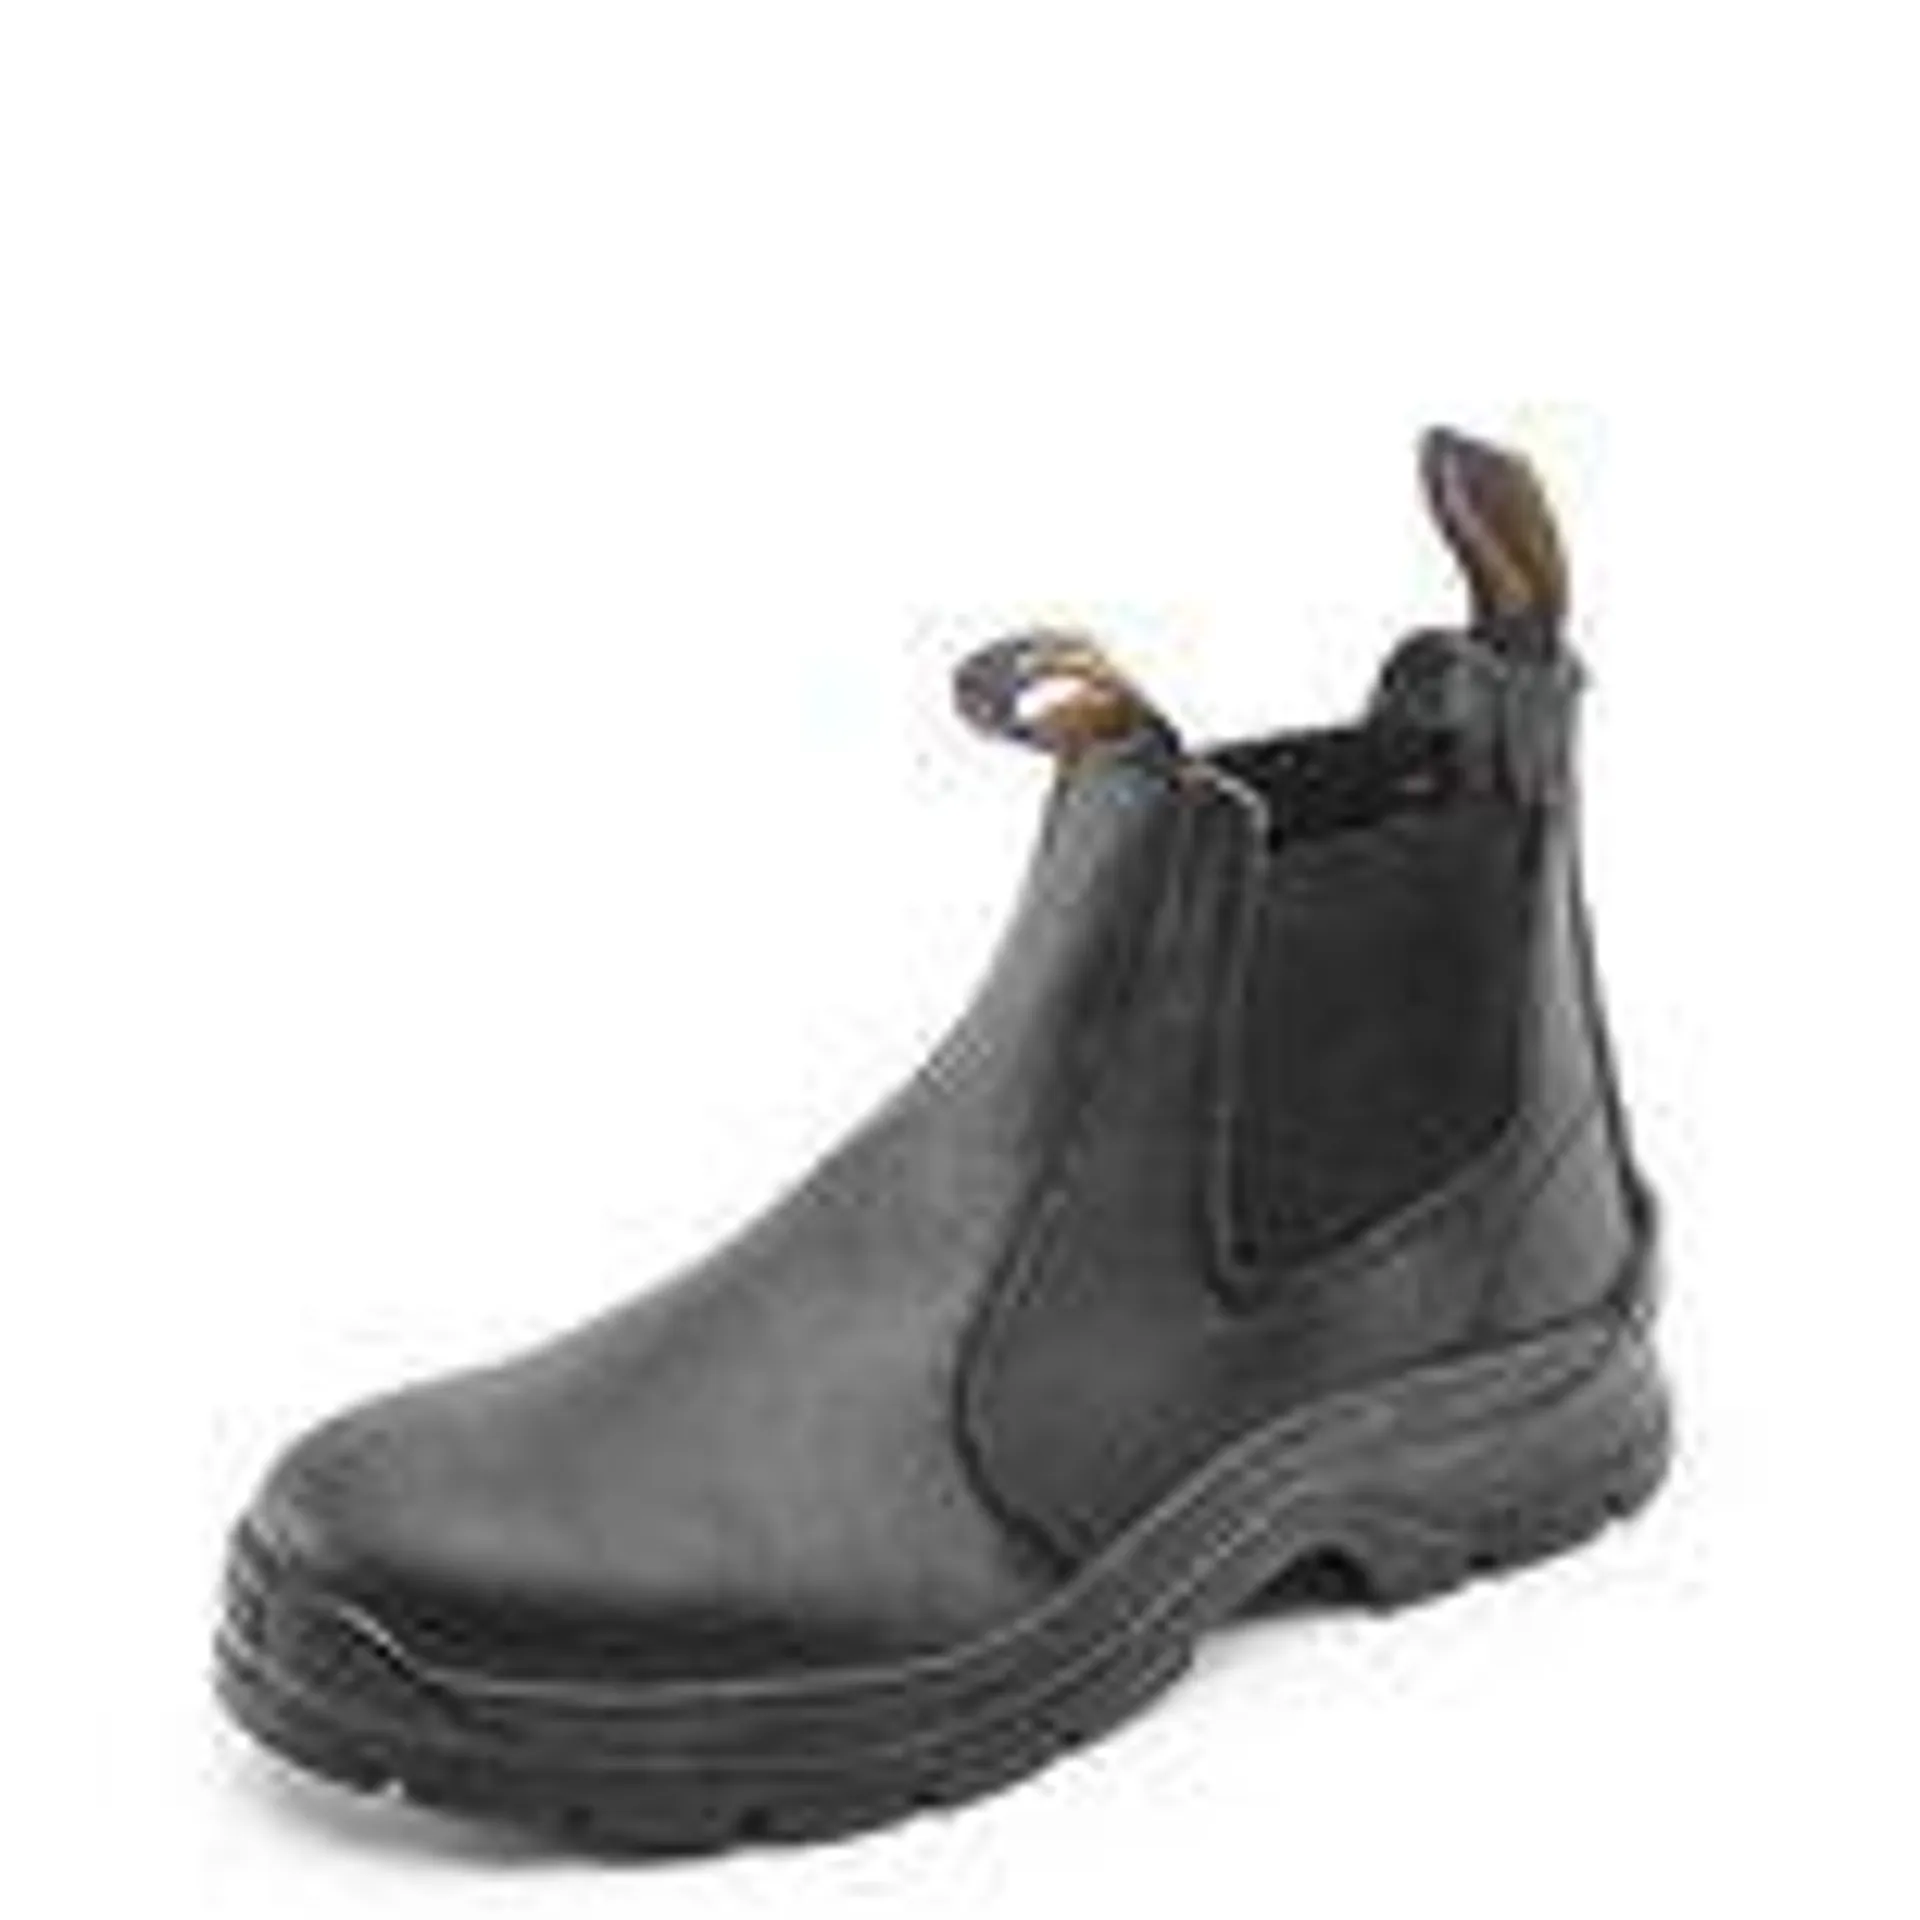 Blundstone Style 310 Workfit Elastic Sided Boot